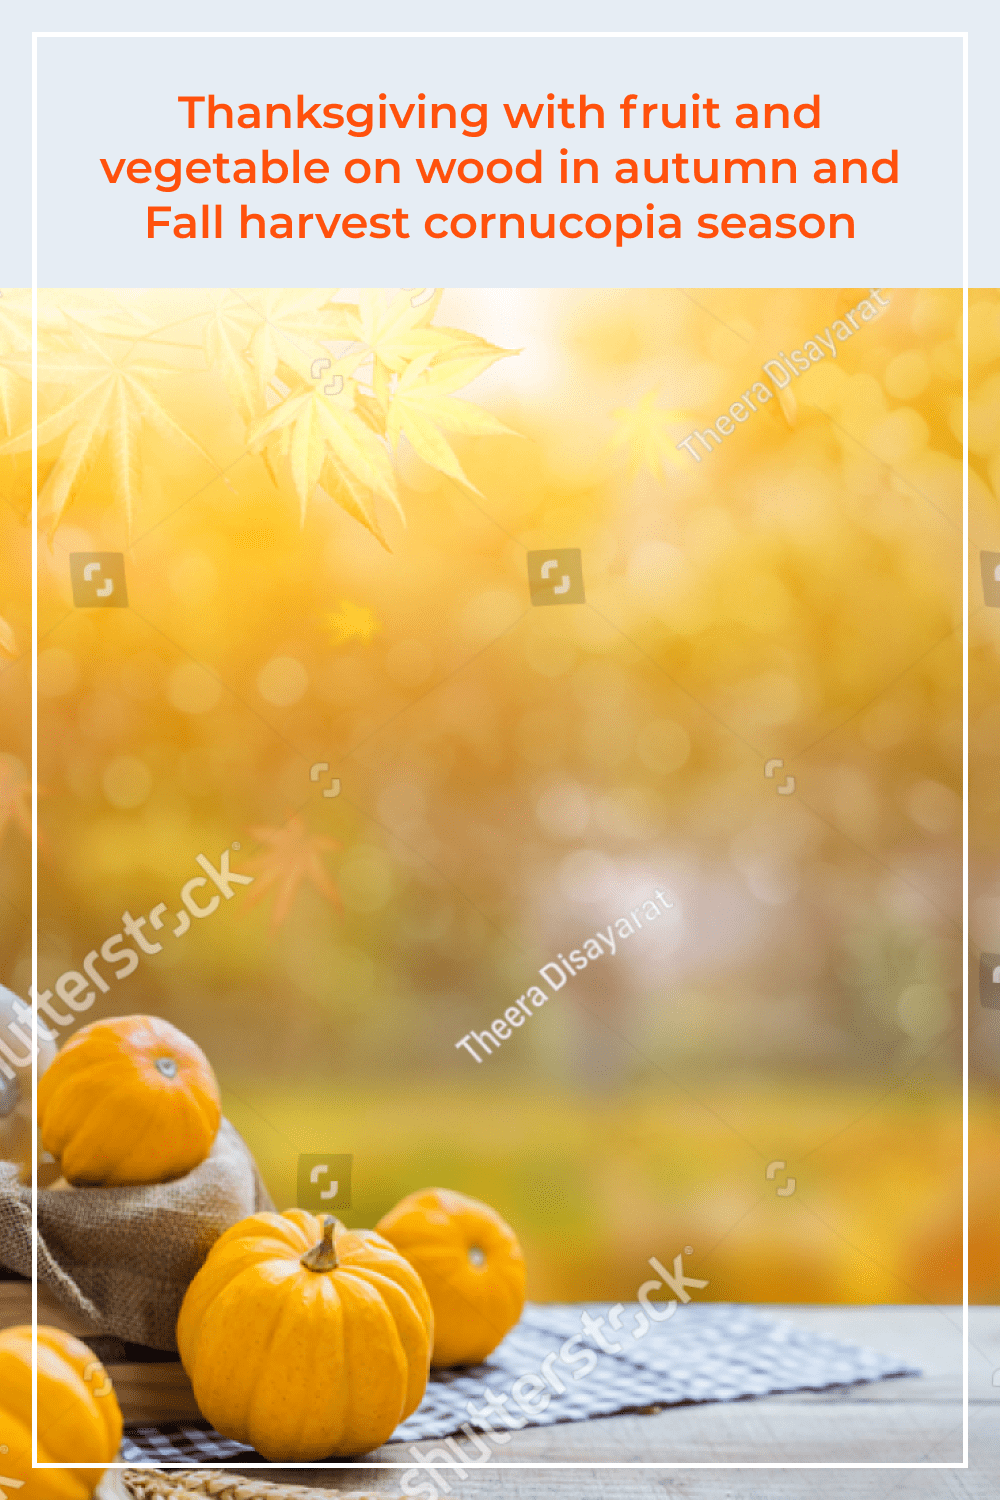 Thanksgiving with fruit and vegetable on wood in autumn and Fall harvest cornucopia season.